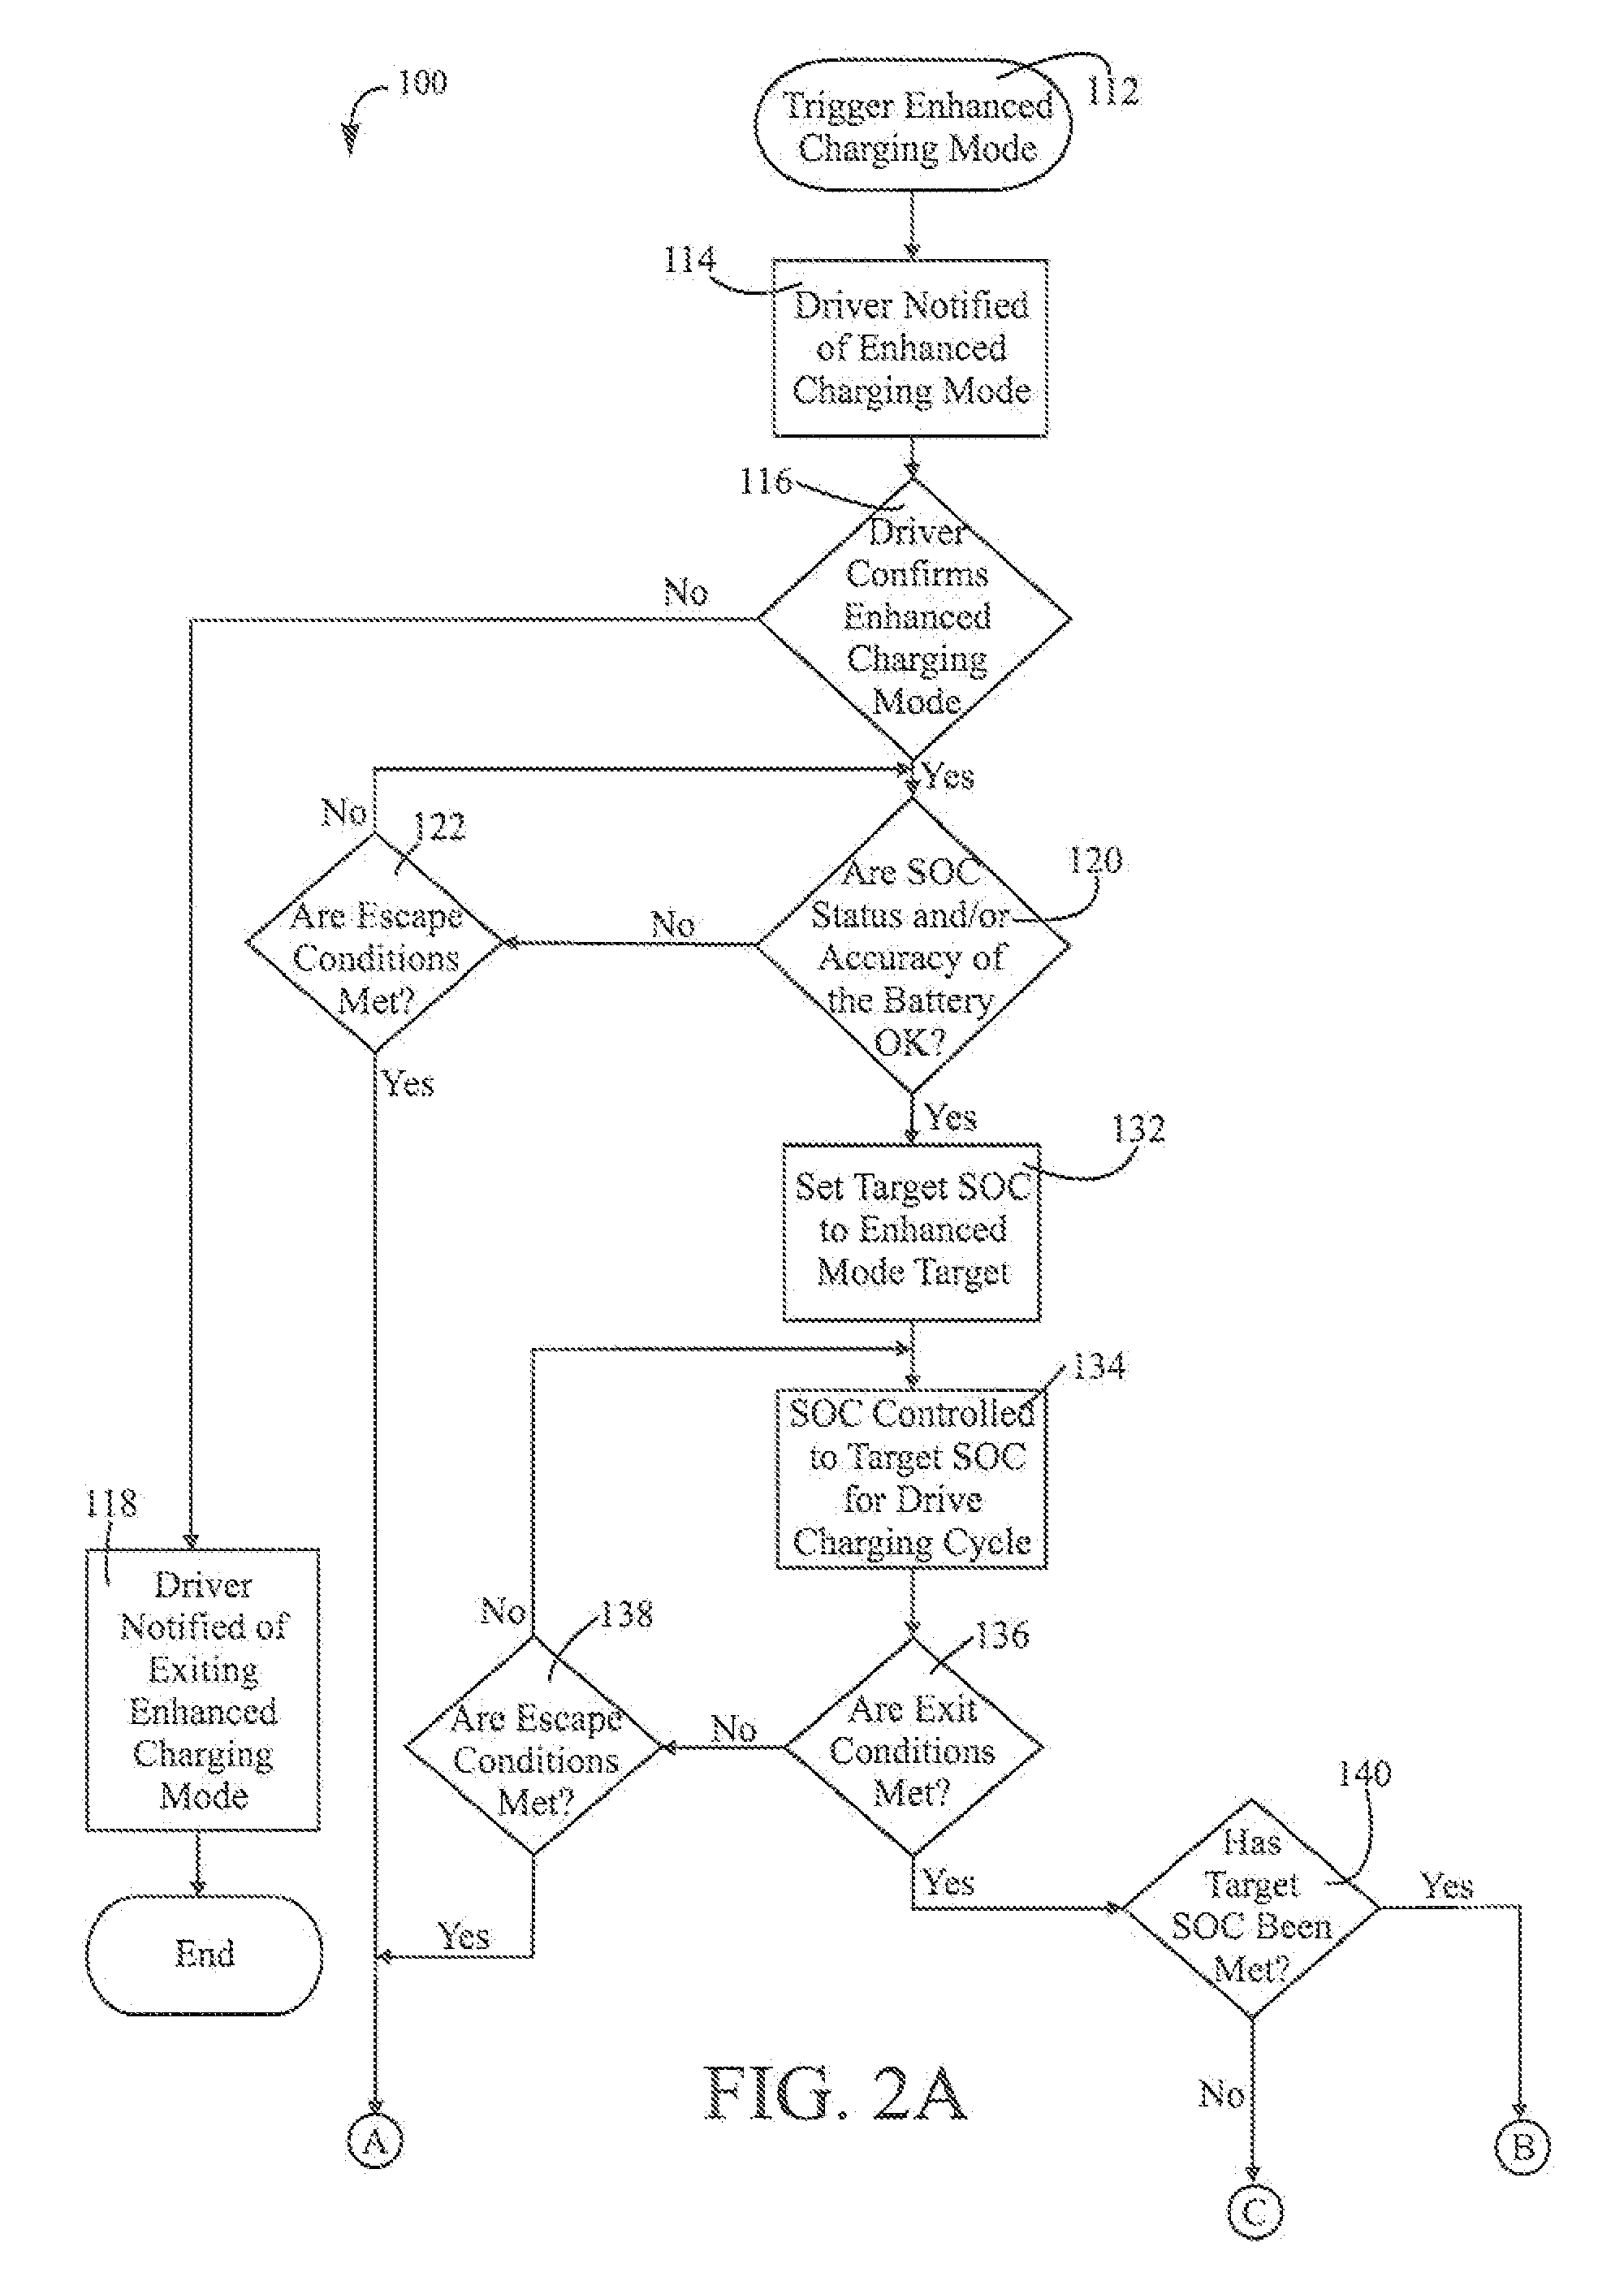 Controlling state of charge of a vehicle battery